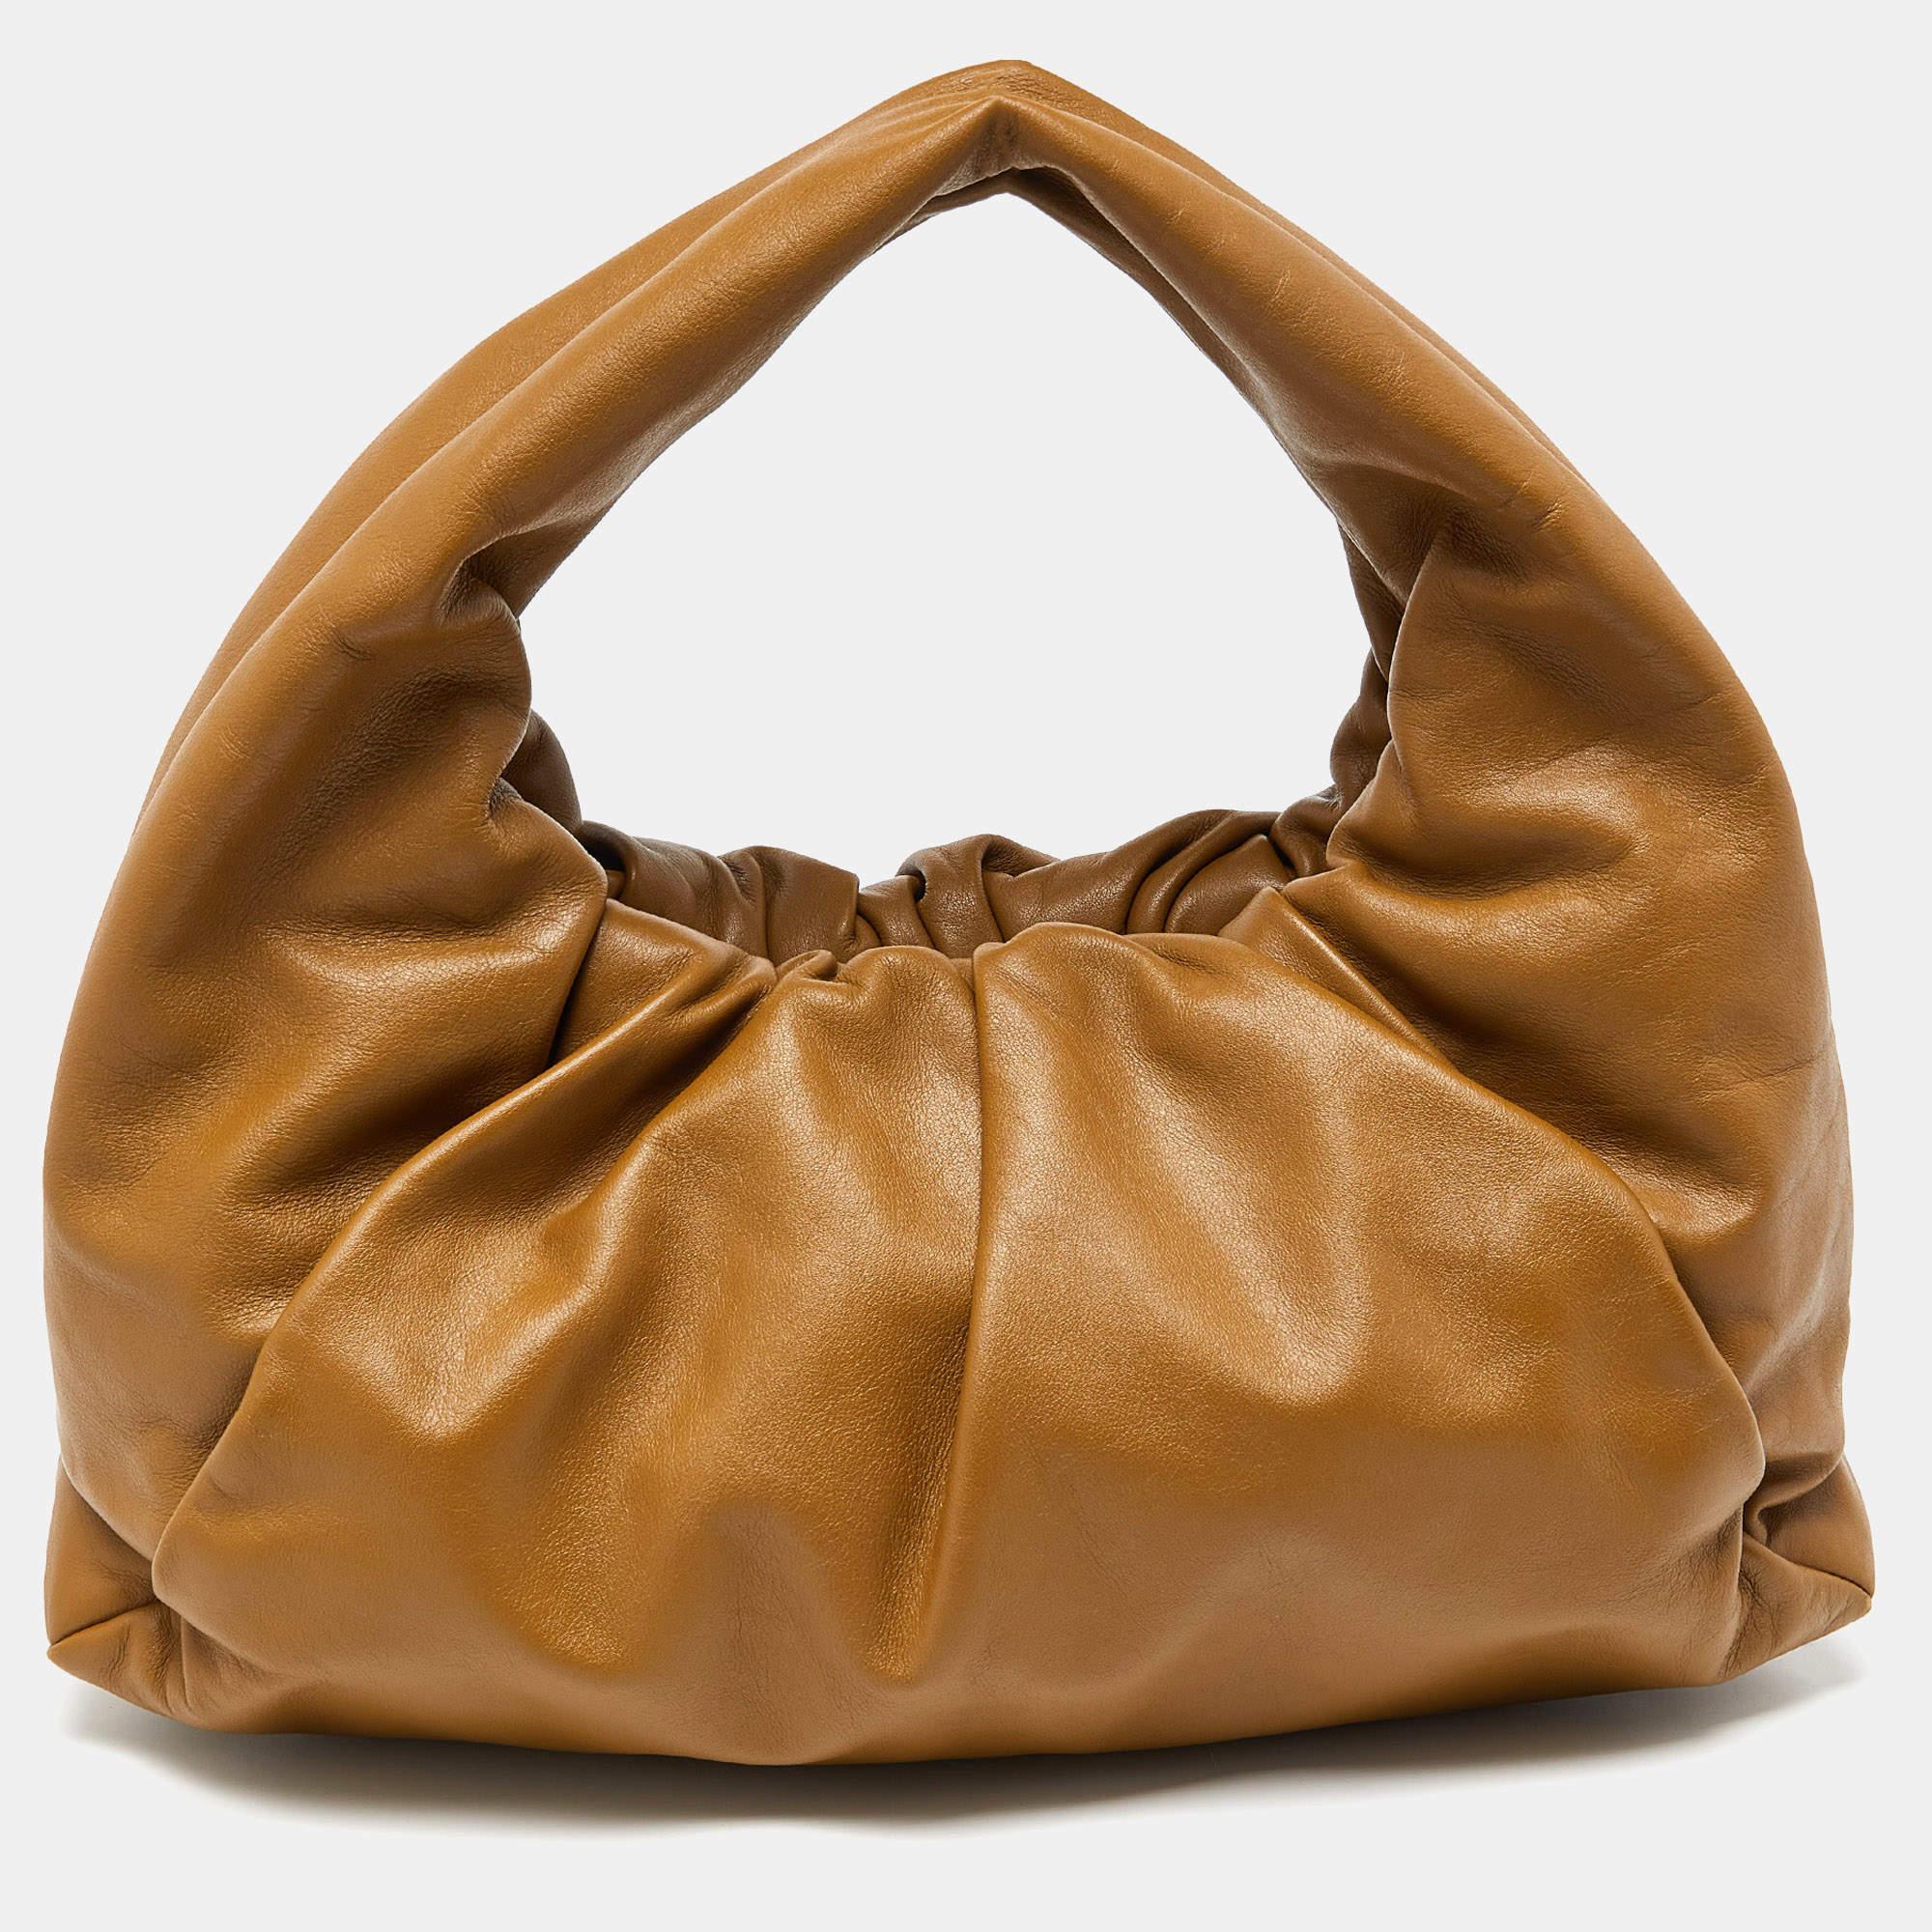 From the House of Bottega Veneta, this shoulder pouch bag offers nothing but impeccable style and practicality to you. Sewn using brown leather into a slouched silhouette, this bag features gold-toned hardware and a single handle. It accommodates a